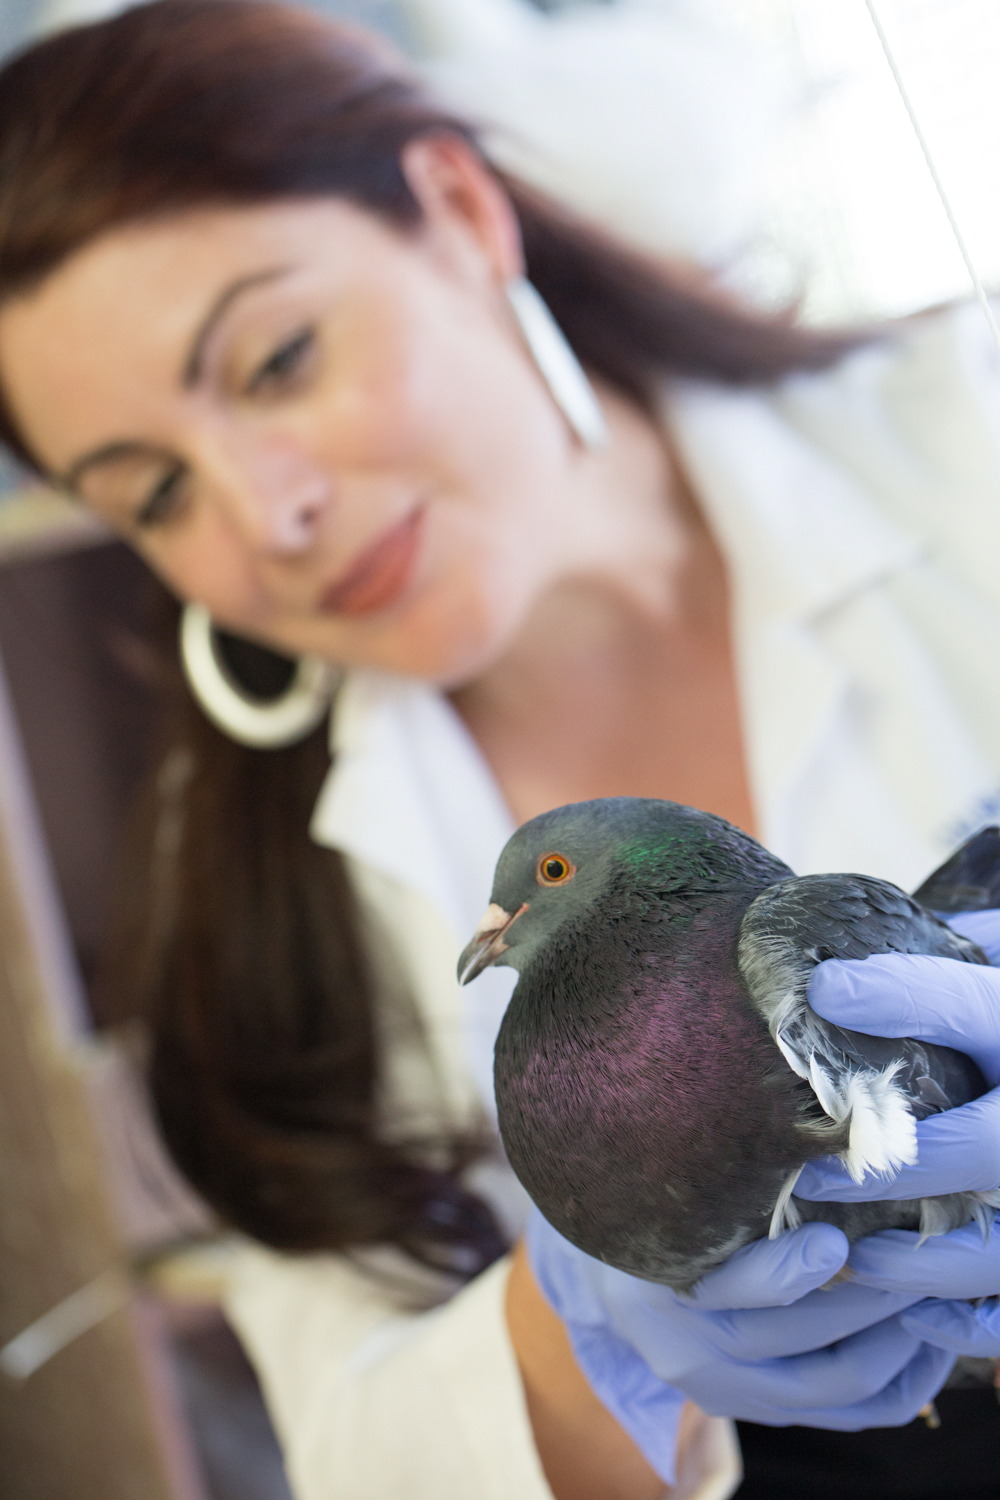 Assistant Professor Rebecca Calisi, Department of Neurobiology, Physiology and Behavior, analyzes toxins in pigeons to better understand how the birds can provide insight into environmental pollution levels in human populations. David Slipher/UC Davis